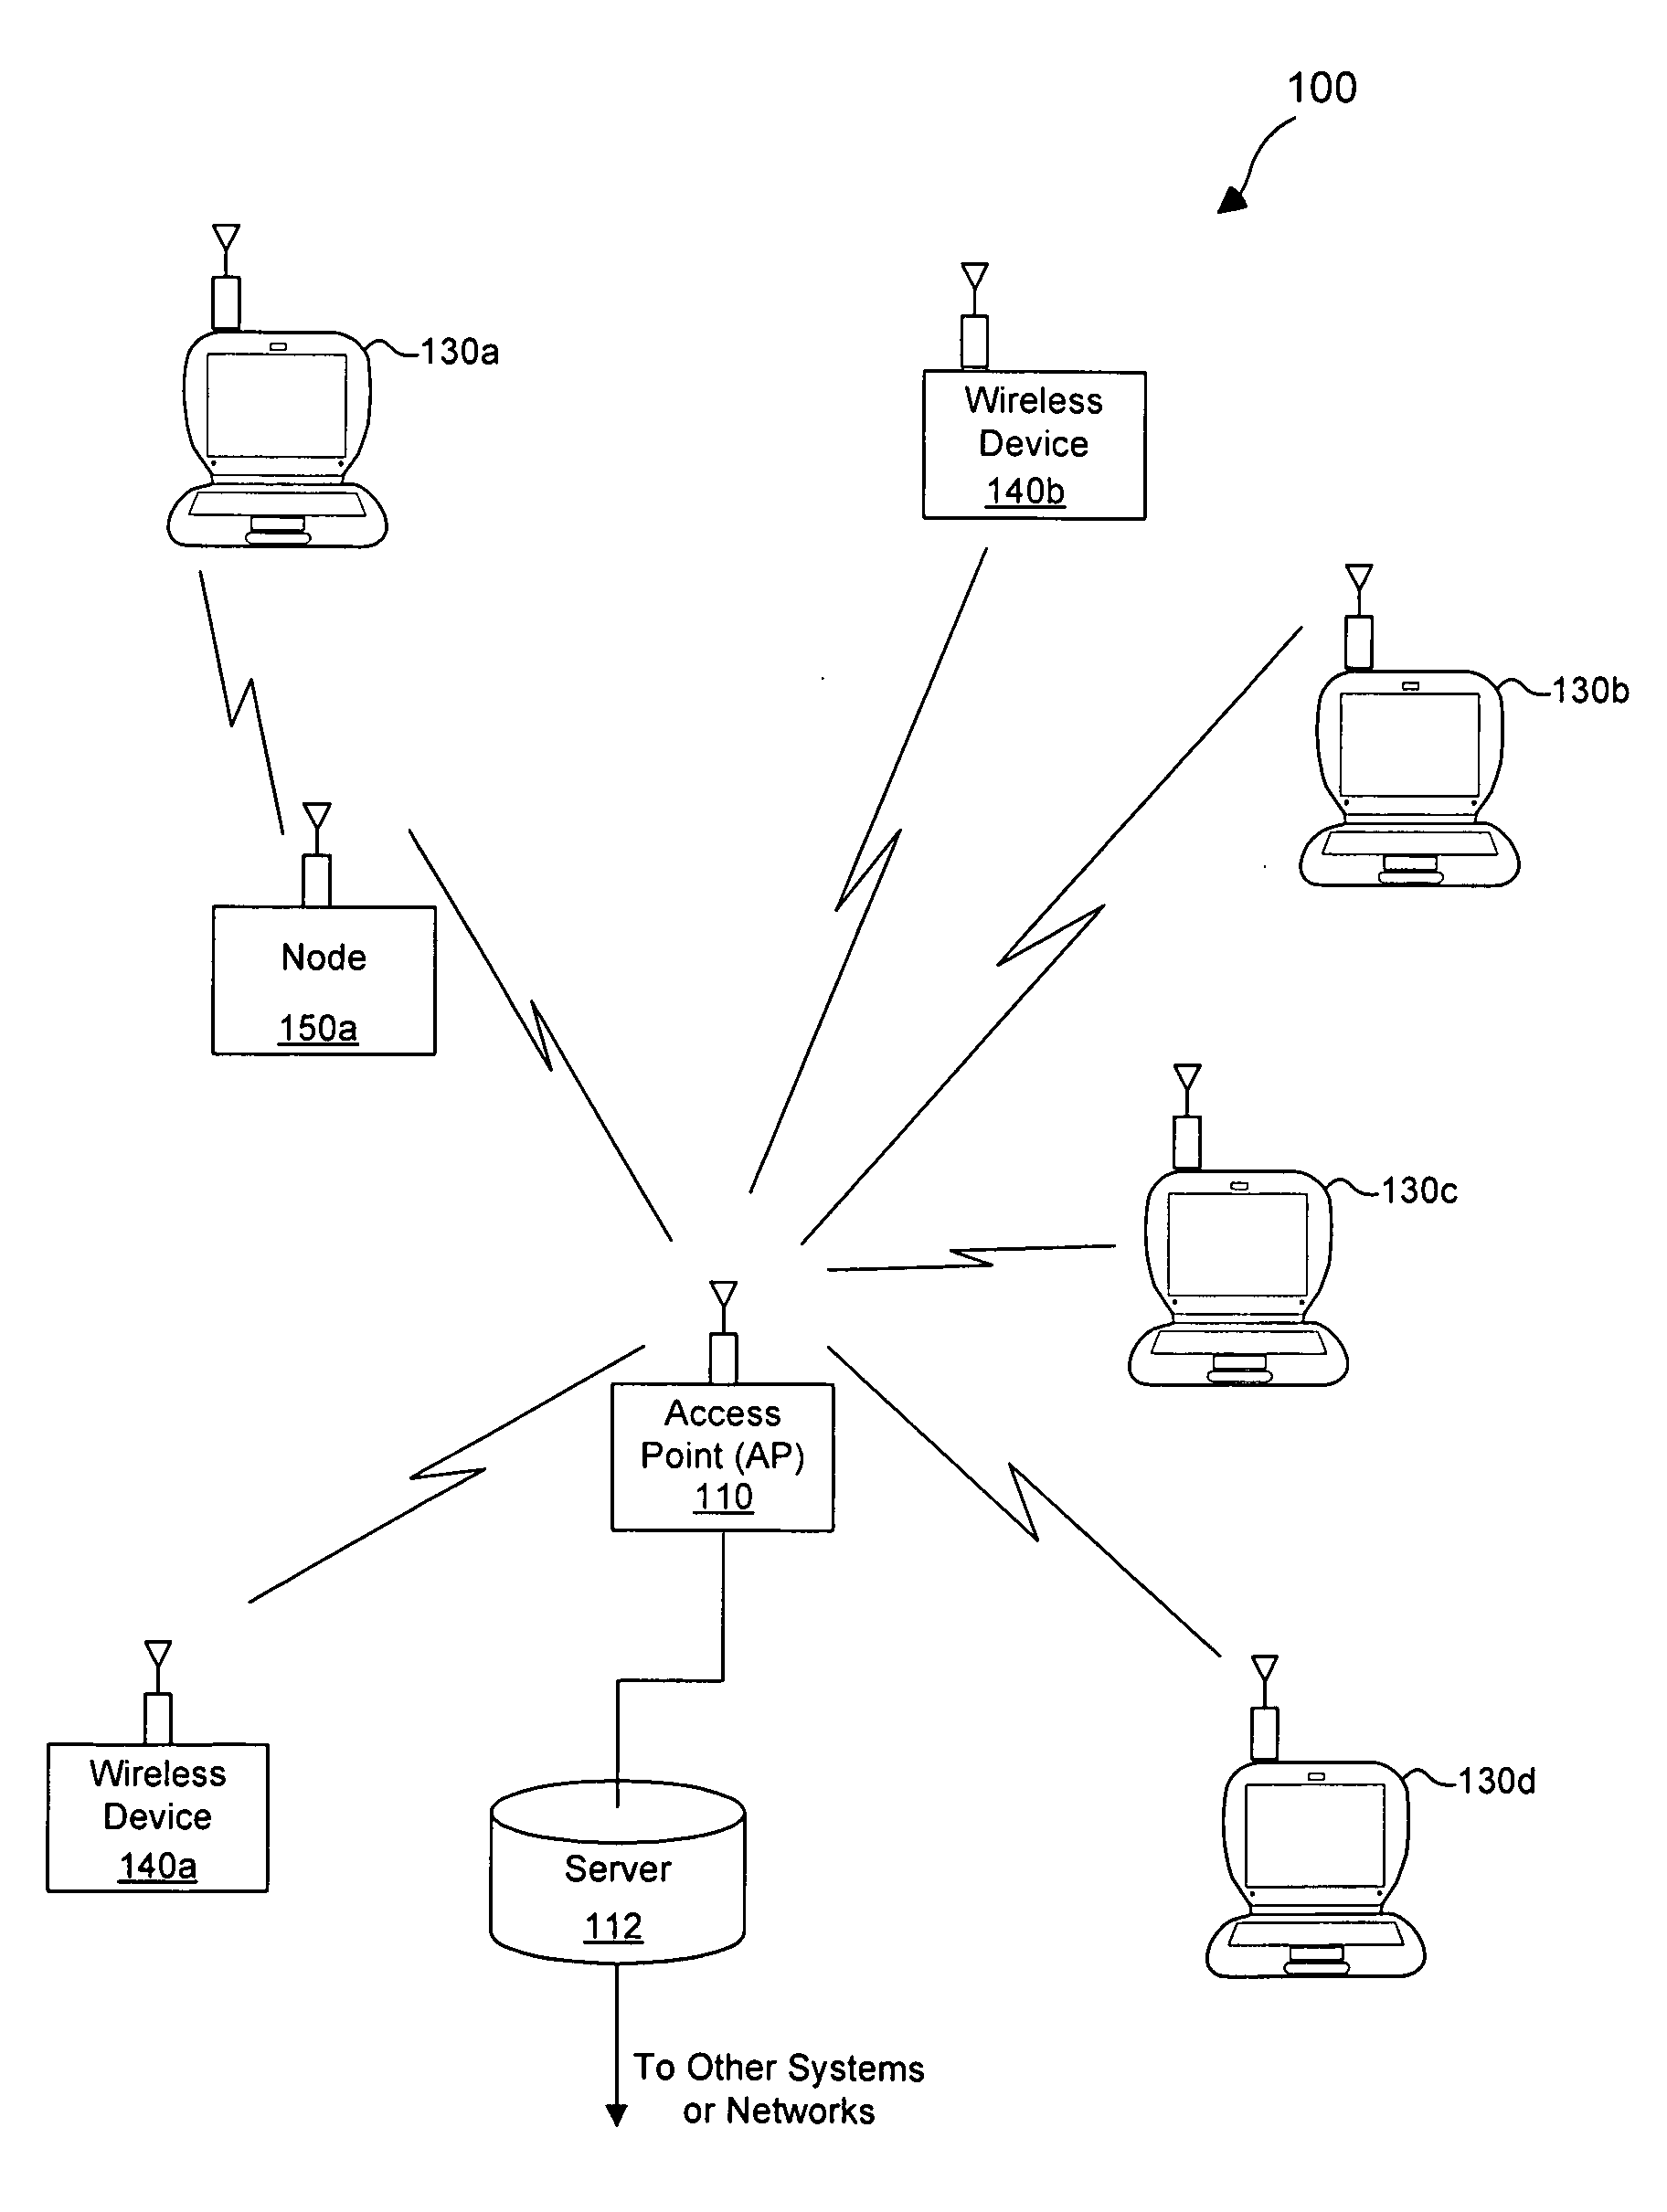 Systems and methods for distance measurement in wireless networks